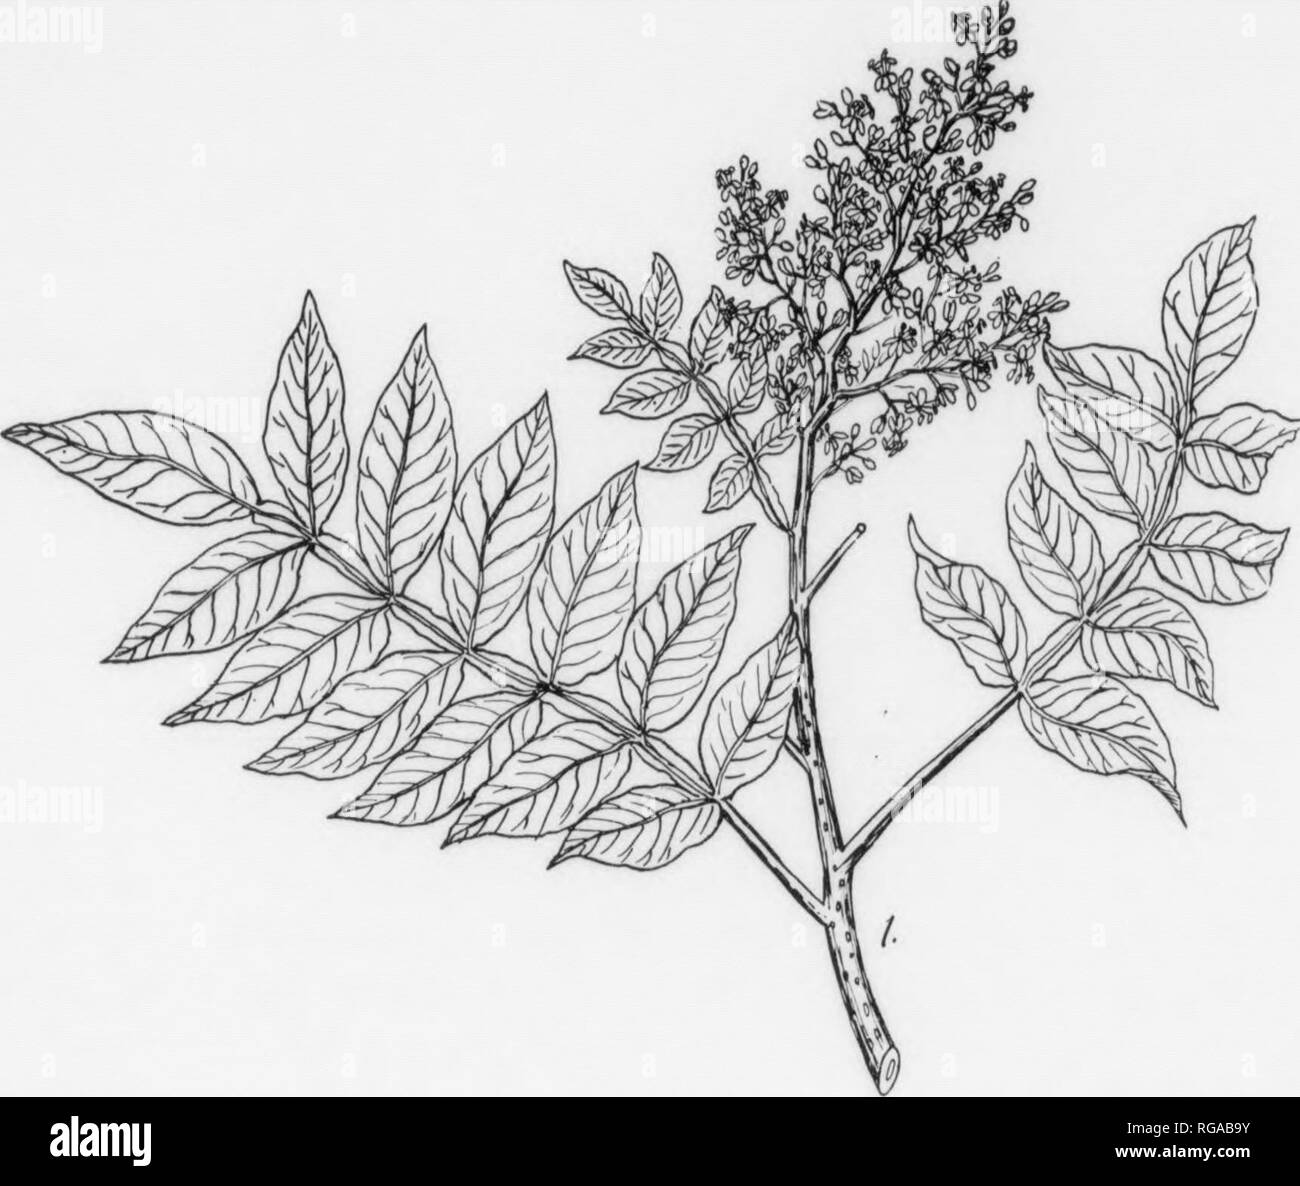 . Bulletin (Pennsylvania Department of Forestry), no. 11. Forests and forestry. 186 1 DWARF SUMACH. Rhus copallina, Linnaeus. FOHM—A small shrub rarely more than 6-S ft, tall, becomes a tree only In Arkansas and Texas. BARK—Rather thin, light to reddish-brown, often smooth; on older specimens may peel off Into papery layers, frequently roughened by large, elevated, brownish projections. TWIGS—At first hairy, somewhat zigzag and greenish-red; later smooth, reddish-brown, and roughened Iry prominent leaf-scars and large darlc-colored lenticels; frequently roughened by large elevated rugosities.  Stock Photo